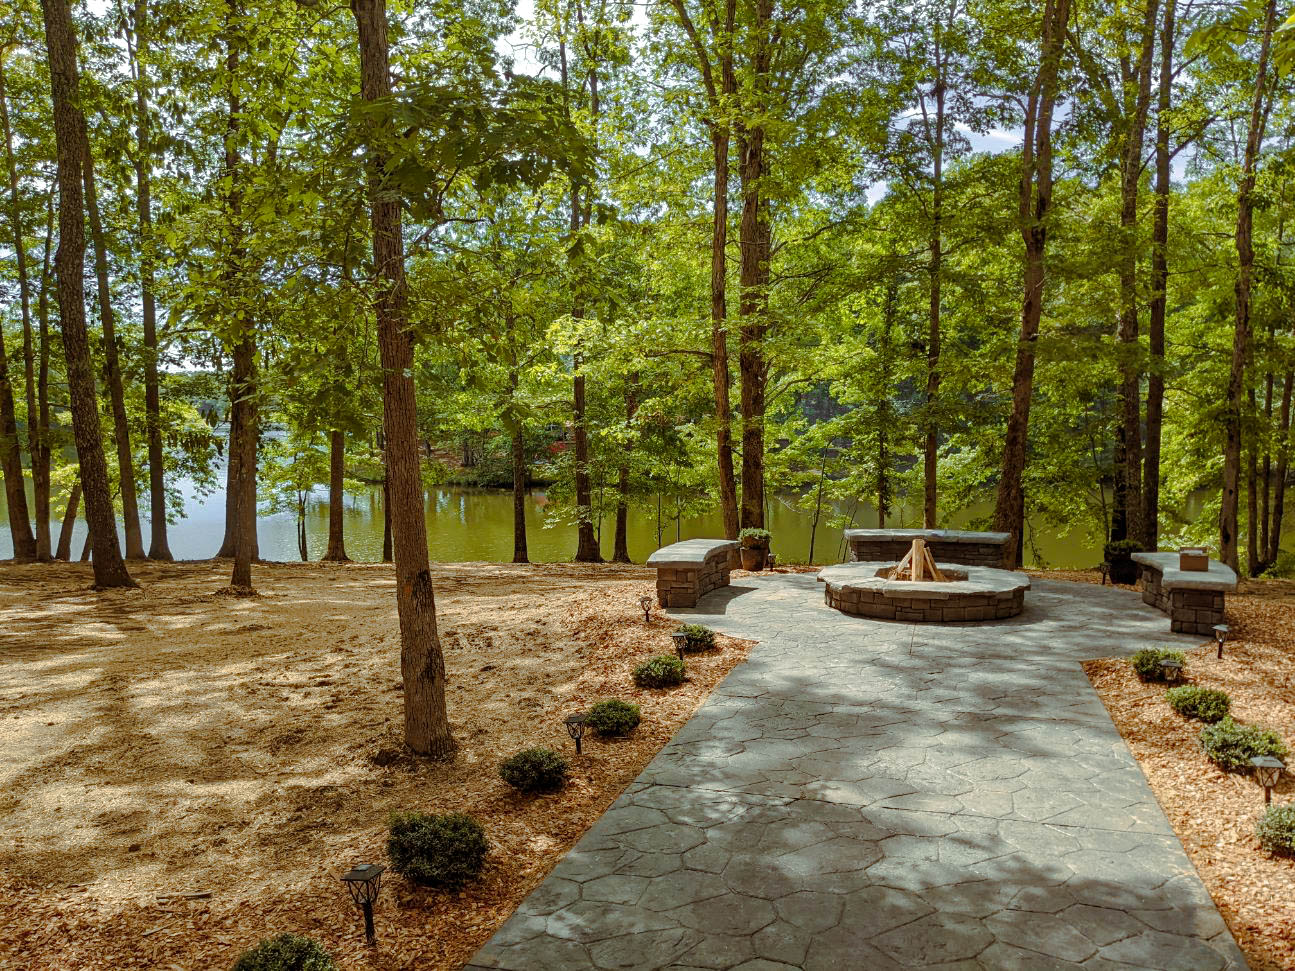 A paved path leading to a fire pit on the banks of a river.